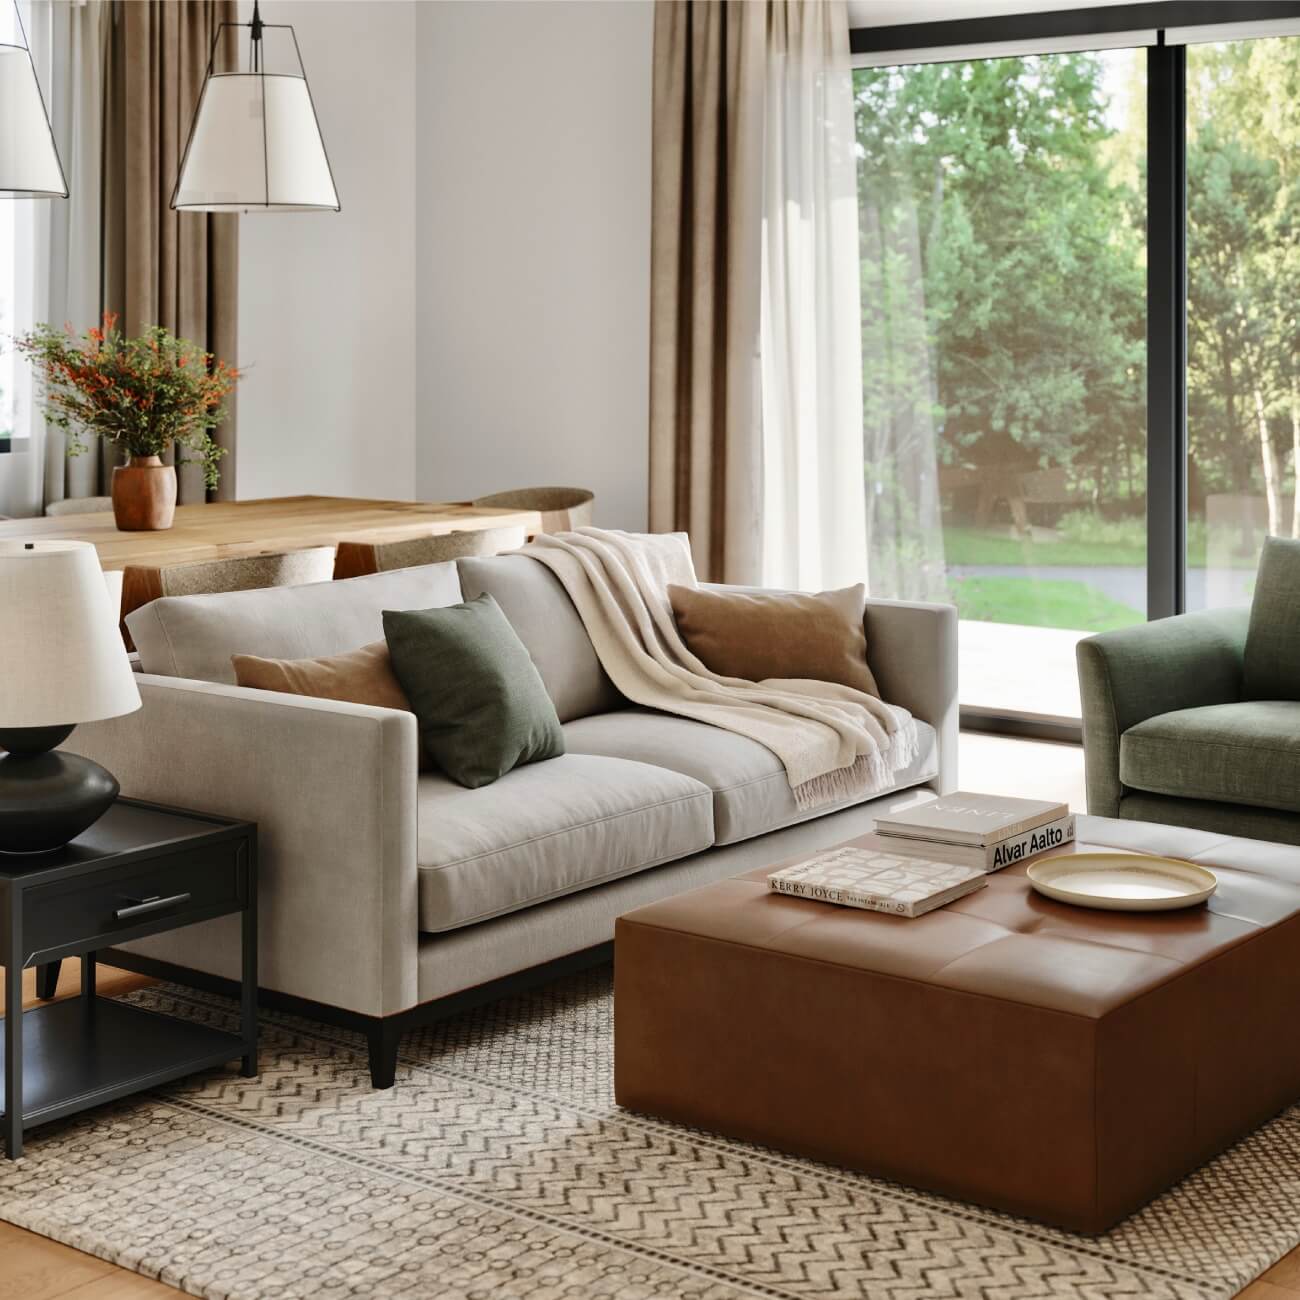 Light grey two seater sofa with cushions and throw in attractive living room